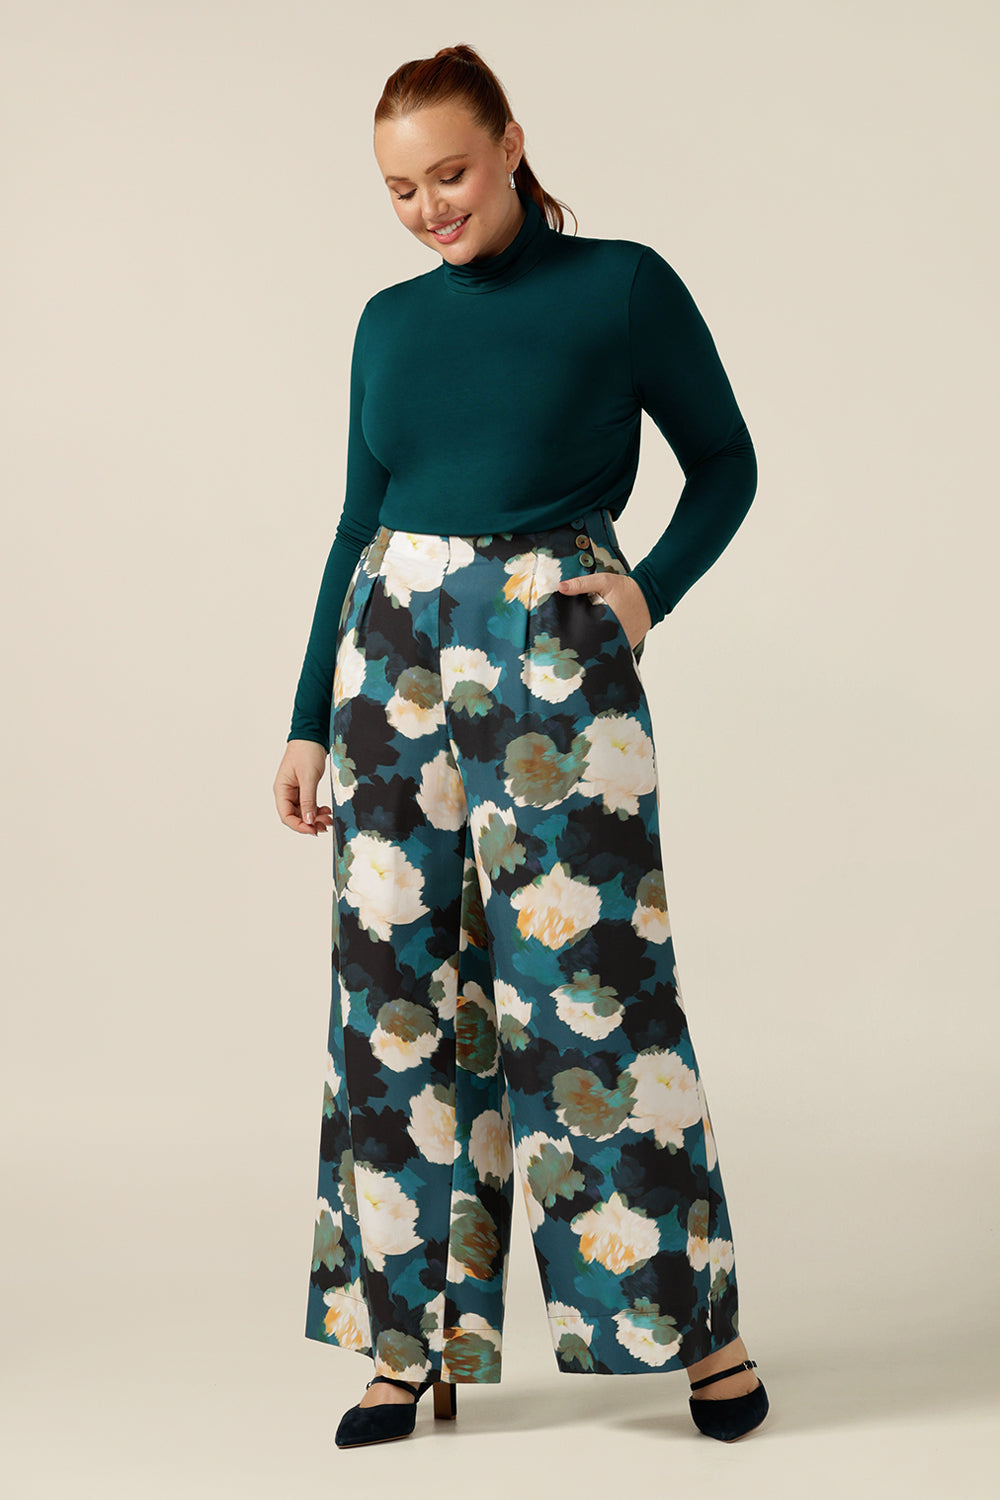 An Australian-made, women's long-sleeve, turtle neck top in petrol green bamboo jersey is worn by a curvy, size 12 woman with wide leg tailored pants for a workwear look. 